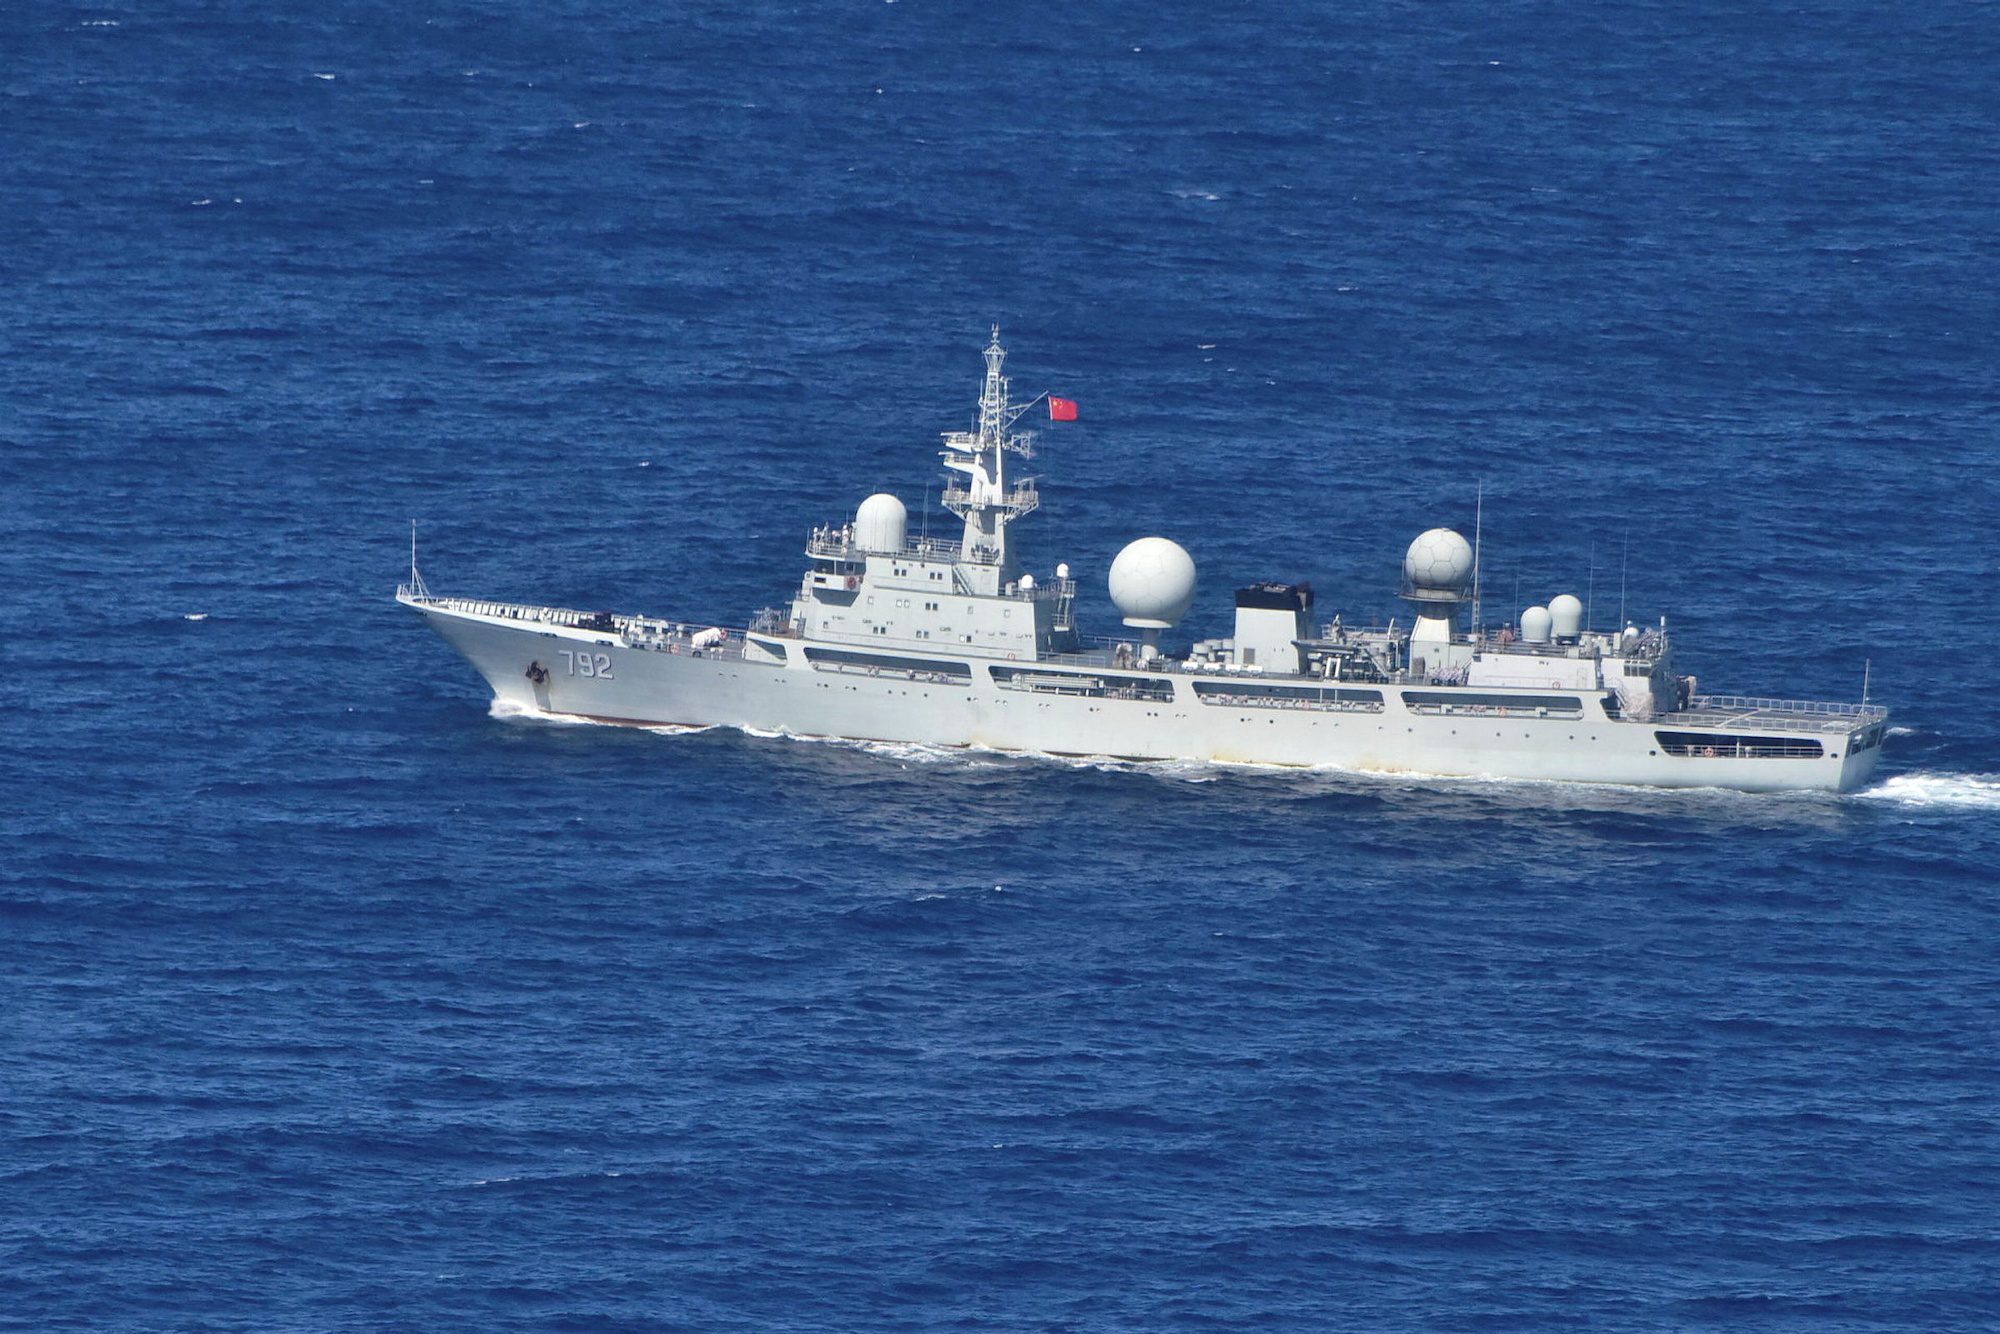 Australia ‘concerned’ about Chinese spy ship off its coast